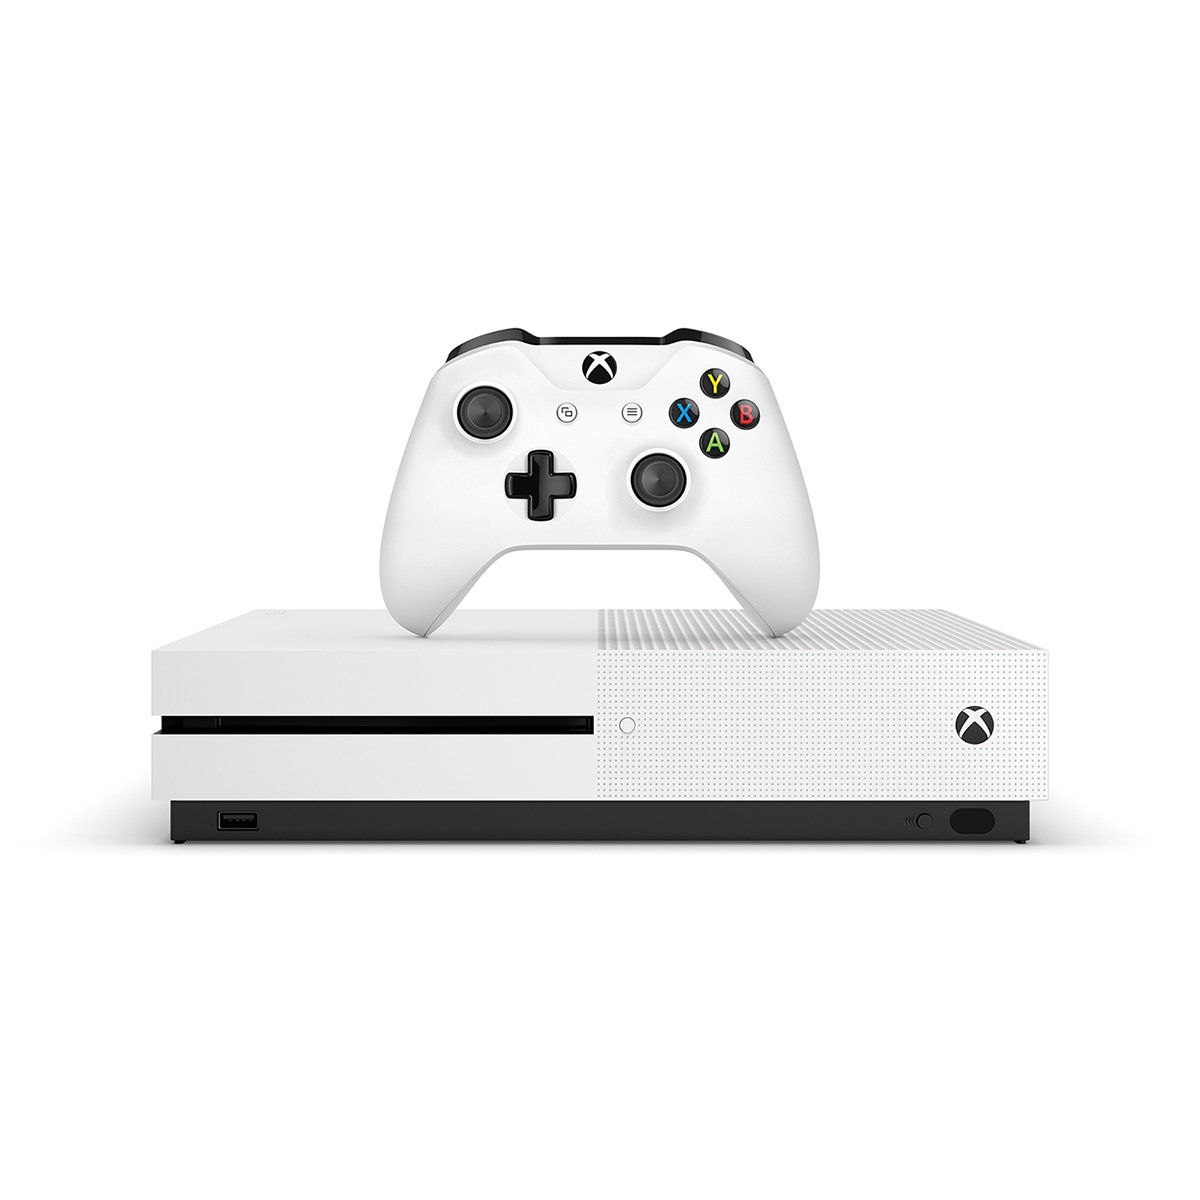 Microsoft Xbox One S FIFA 17 Bundle (500GB) - Game Pad Supported - Wireless - White - AMD Radeon Graphics Core Next - 3840 x 2160-16:9-2160p - Blu-ray Disc Player - 500 GB HDD - Gigabit Ethernet -